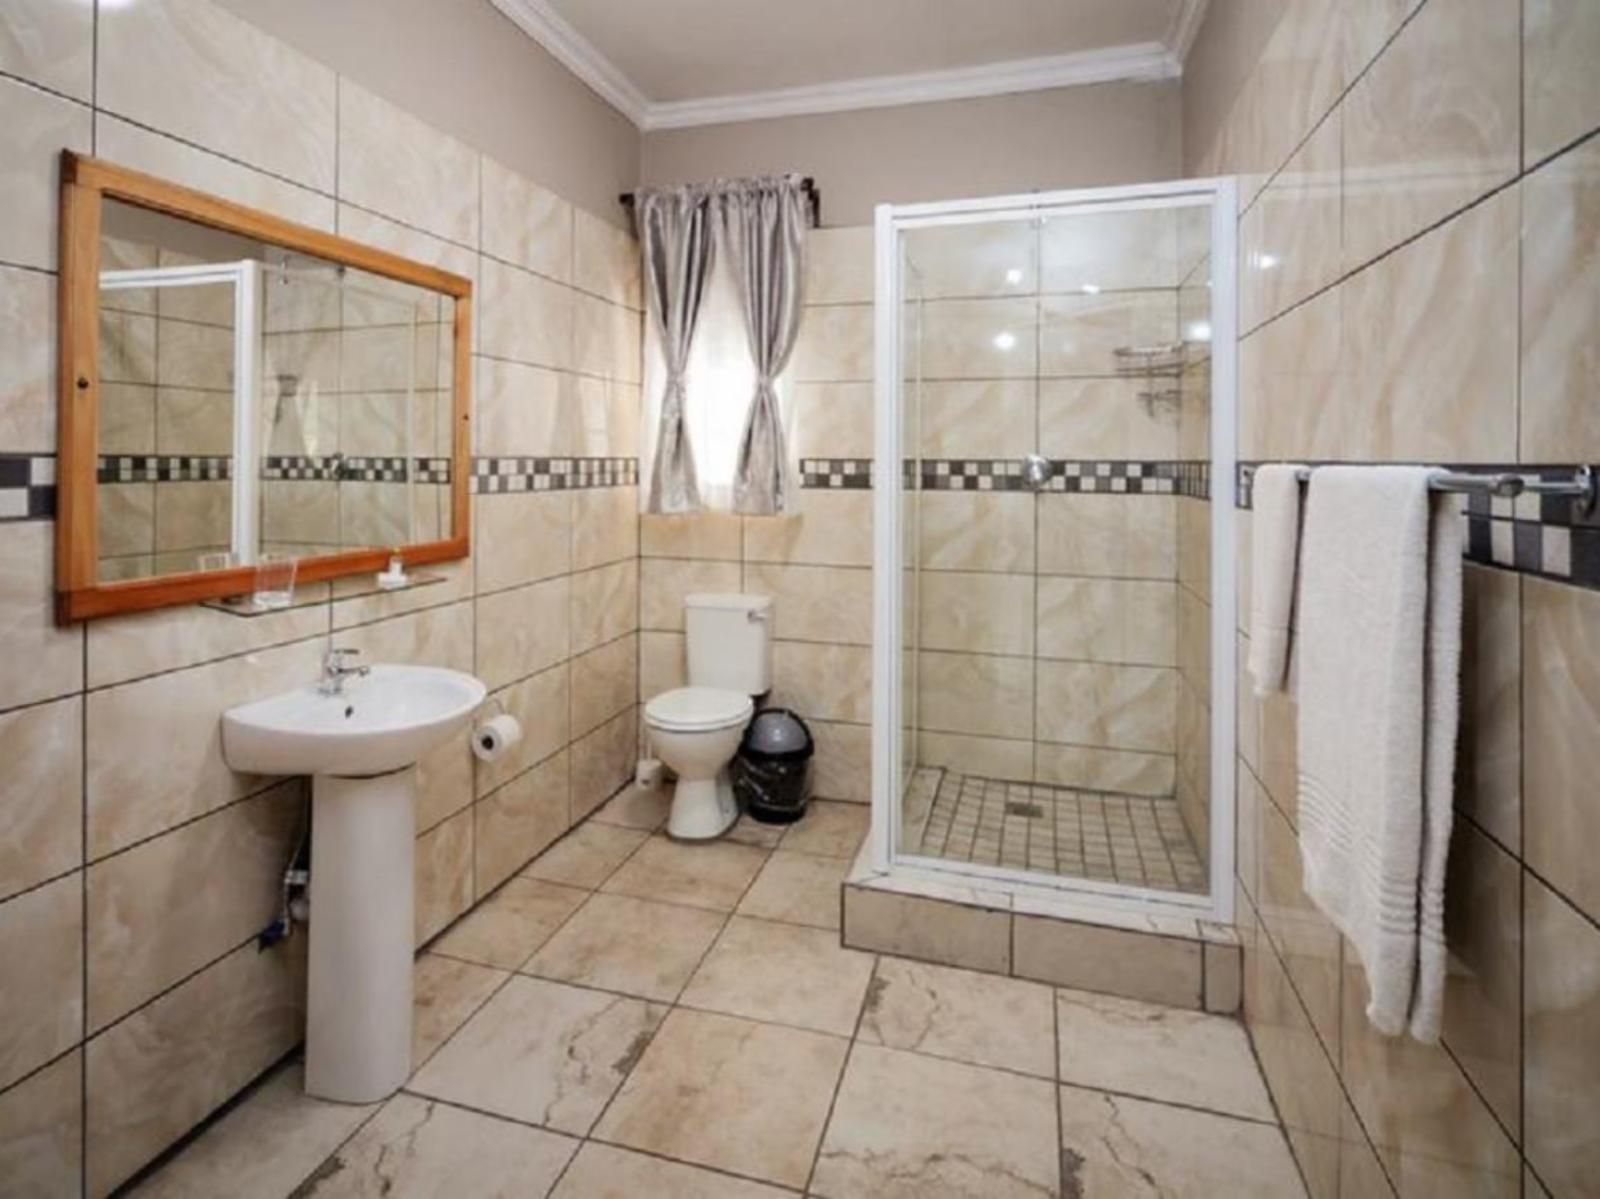 Ivory Tusk Lodge Tzaneen Limpopo Province South Africa Bathroom